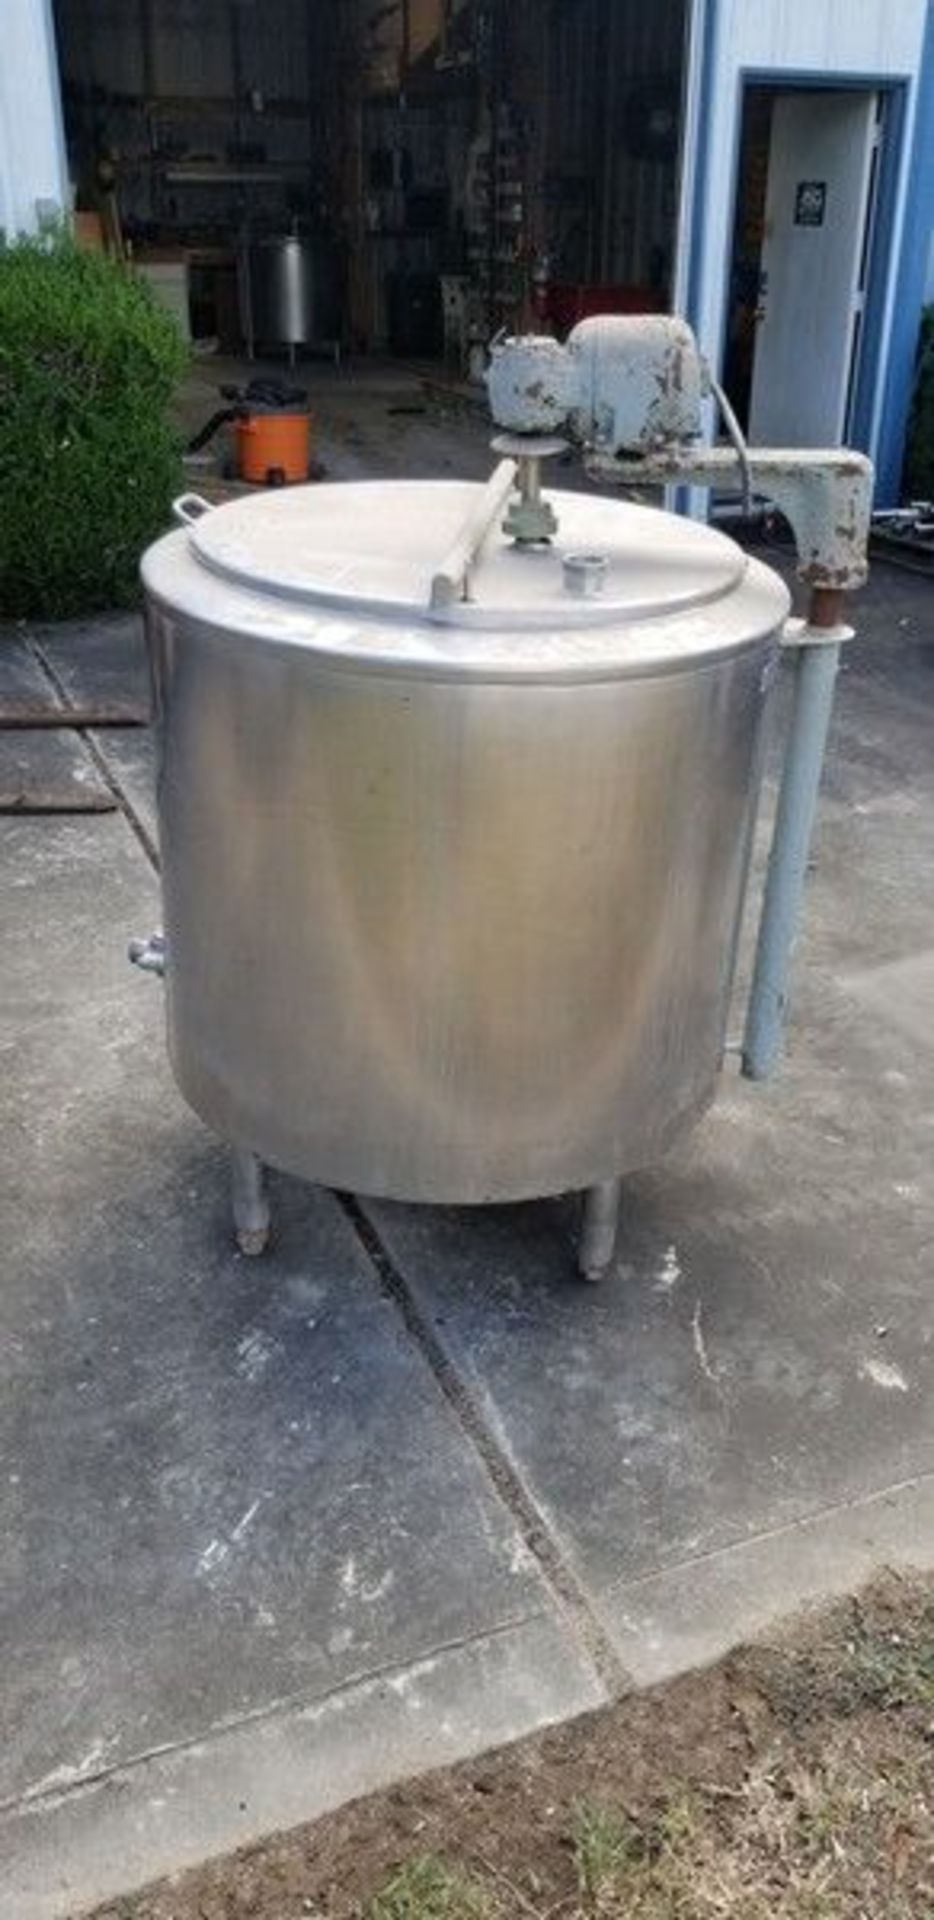 Damrow 100 Gal. S/S Tank, M/N 100-GA, S/N 951121, Type V-H, with S/S Hinge Lids, with Top Mounted - Image 6 of 6